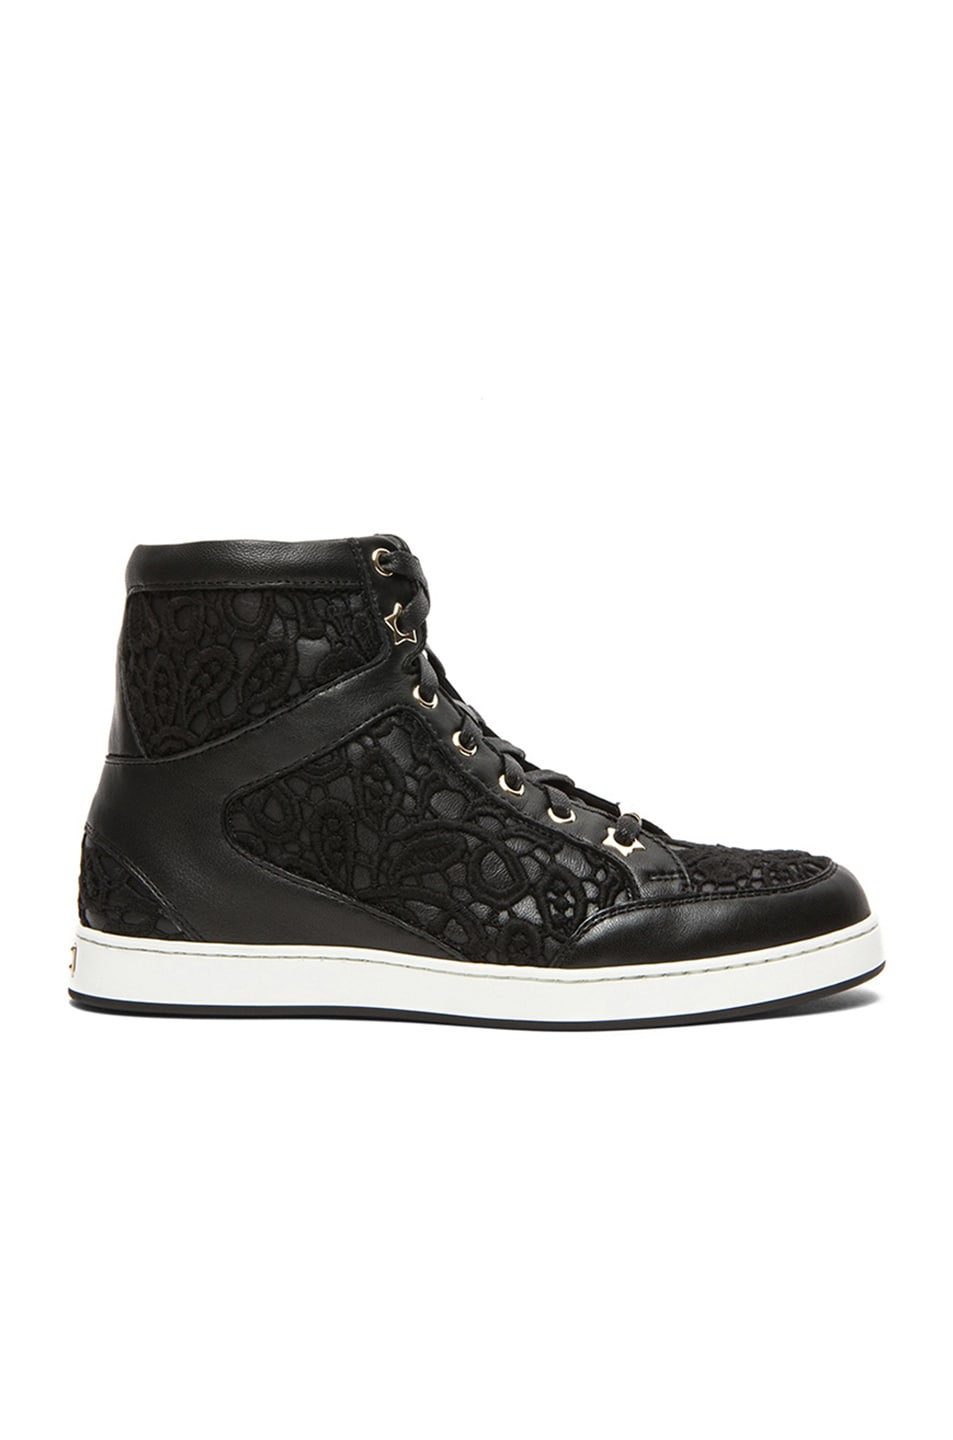 Image 1 of Jimmy Choo Tokyo Nappa Leather High Top Trainers in Black